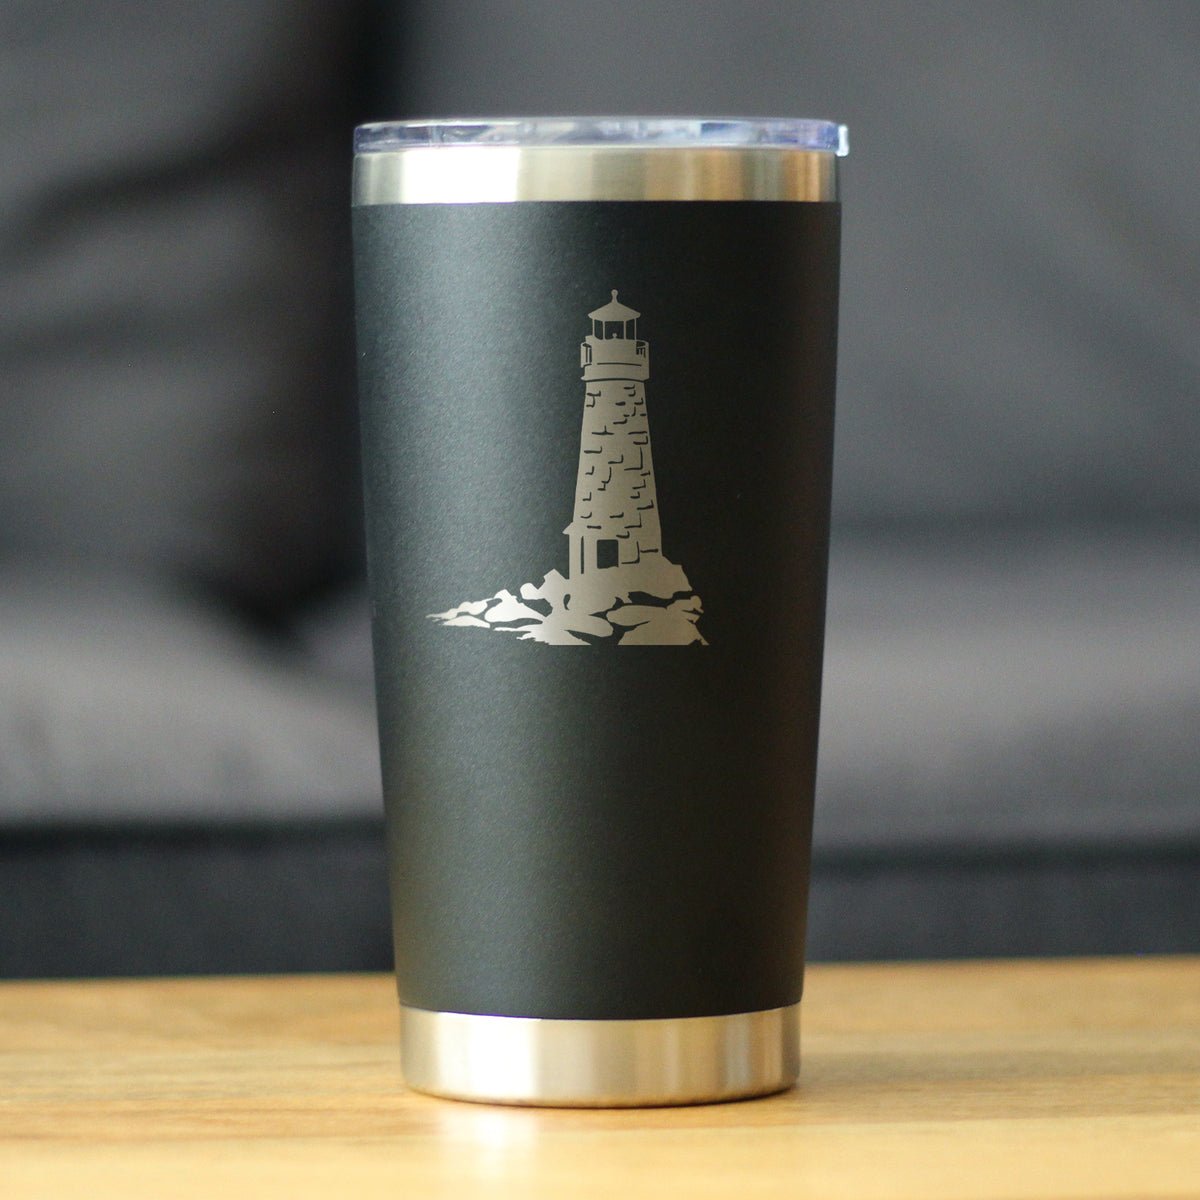 Lighthouse - Insulated Coffee Tumbler Cup with Sliding Lid - Stainless Steel Travel Mug - Beach Gifts and Decor for Women and Men